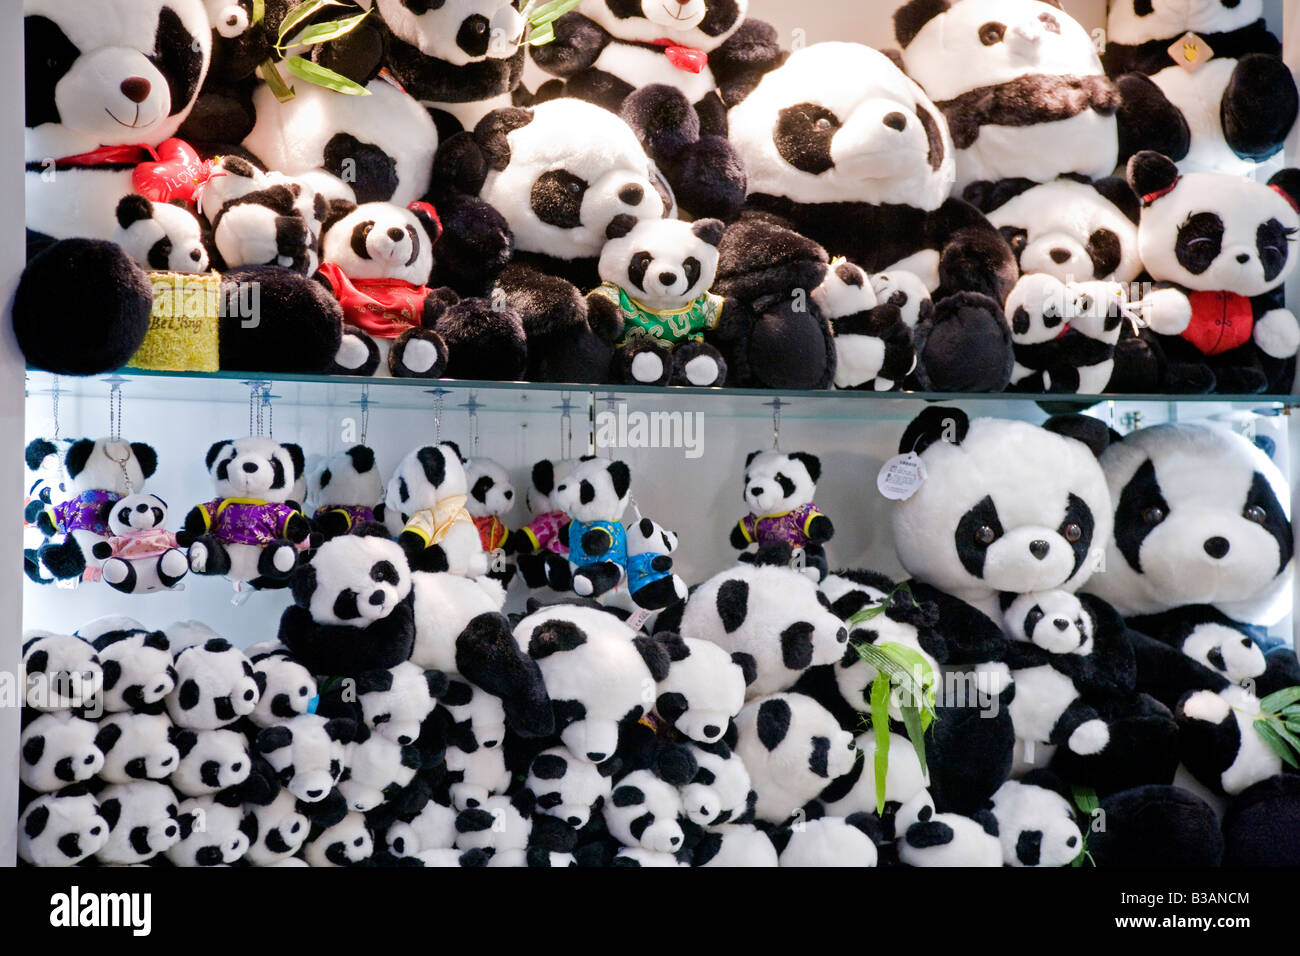 Giant Panda cuddly soft toy dolls on sale in shop in Chengdu Sichuan  Province China JMH3275 Stock Photo - Alamy